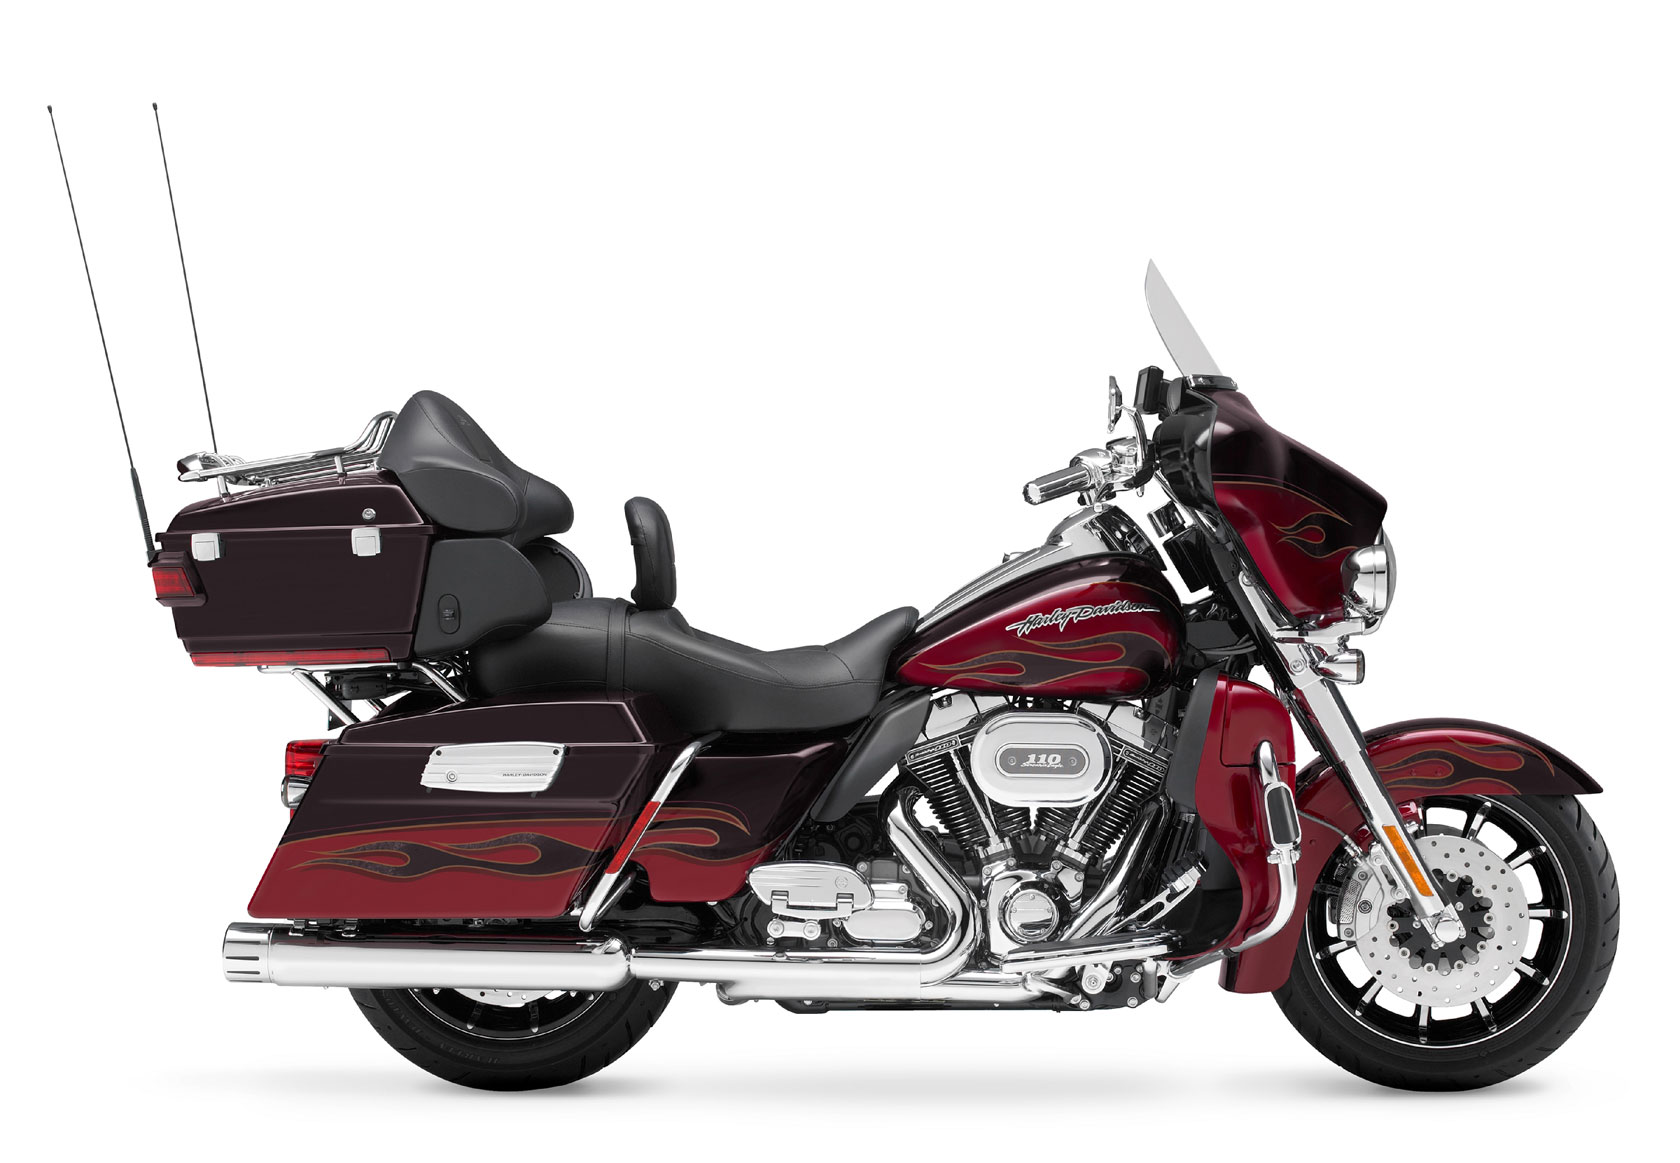 2011 Harley Davidson Electra Glide Classic Promotion Off50